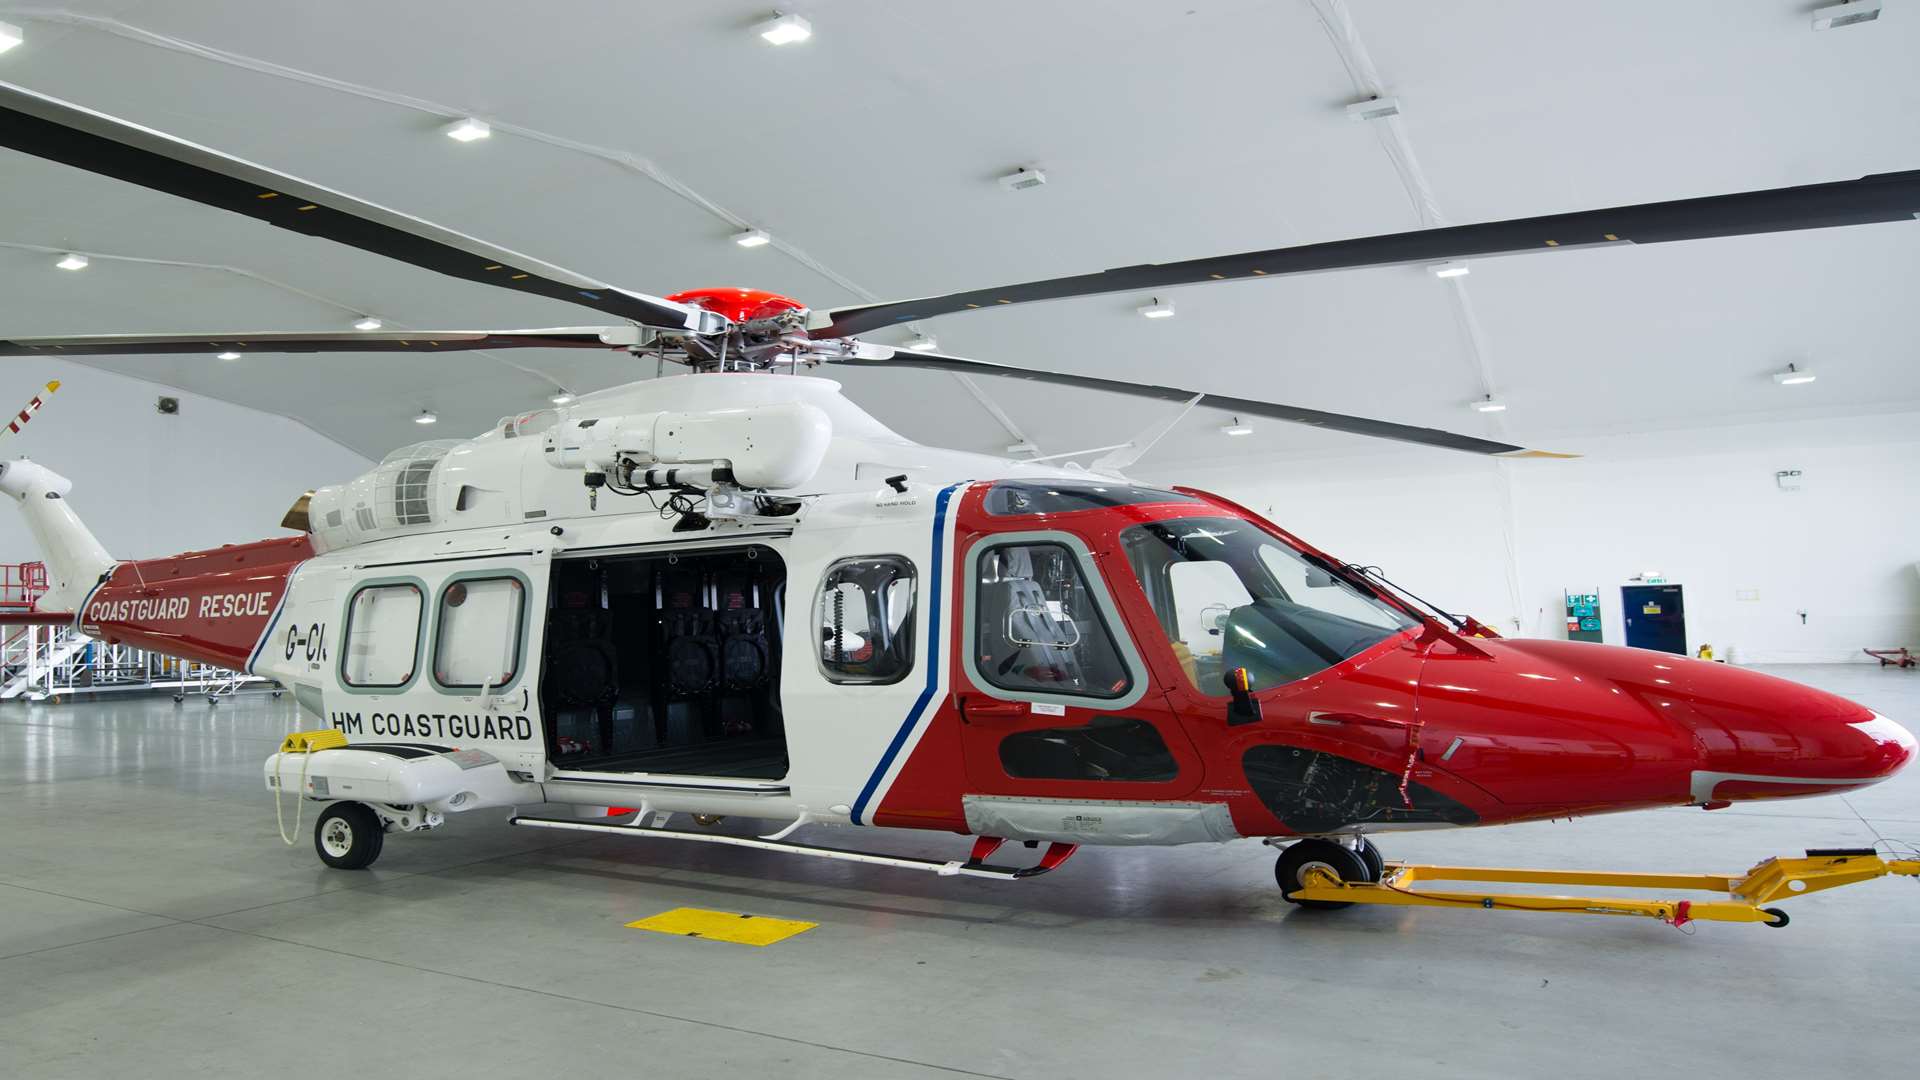 The Bristow search and rescue helicopter